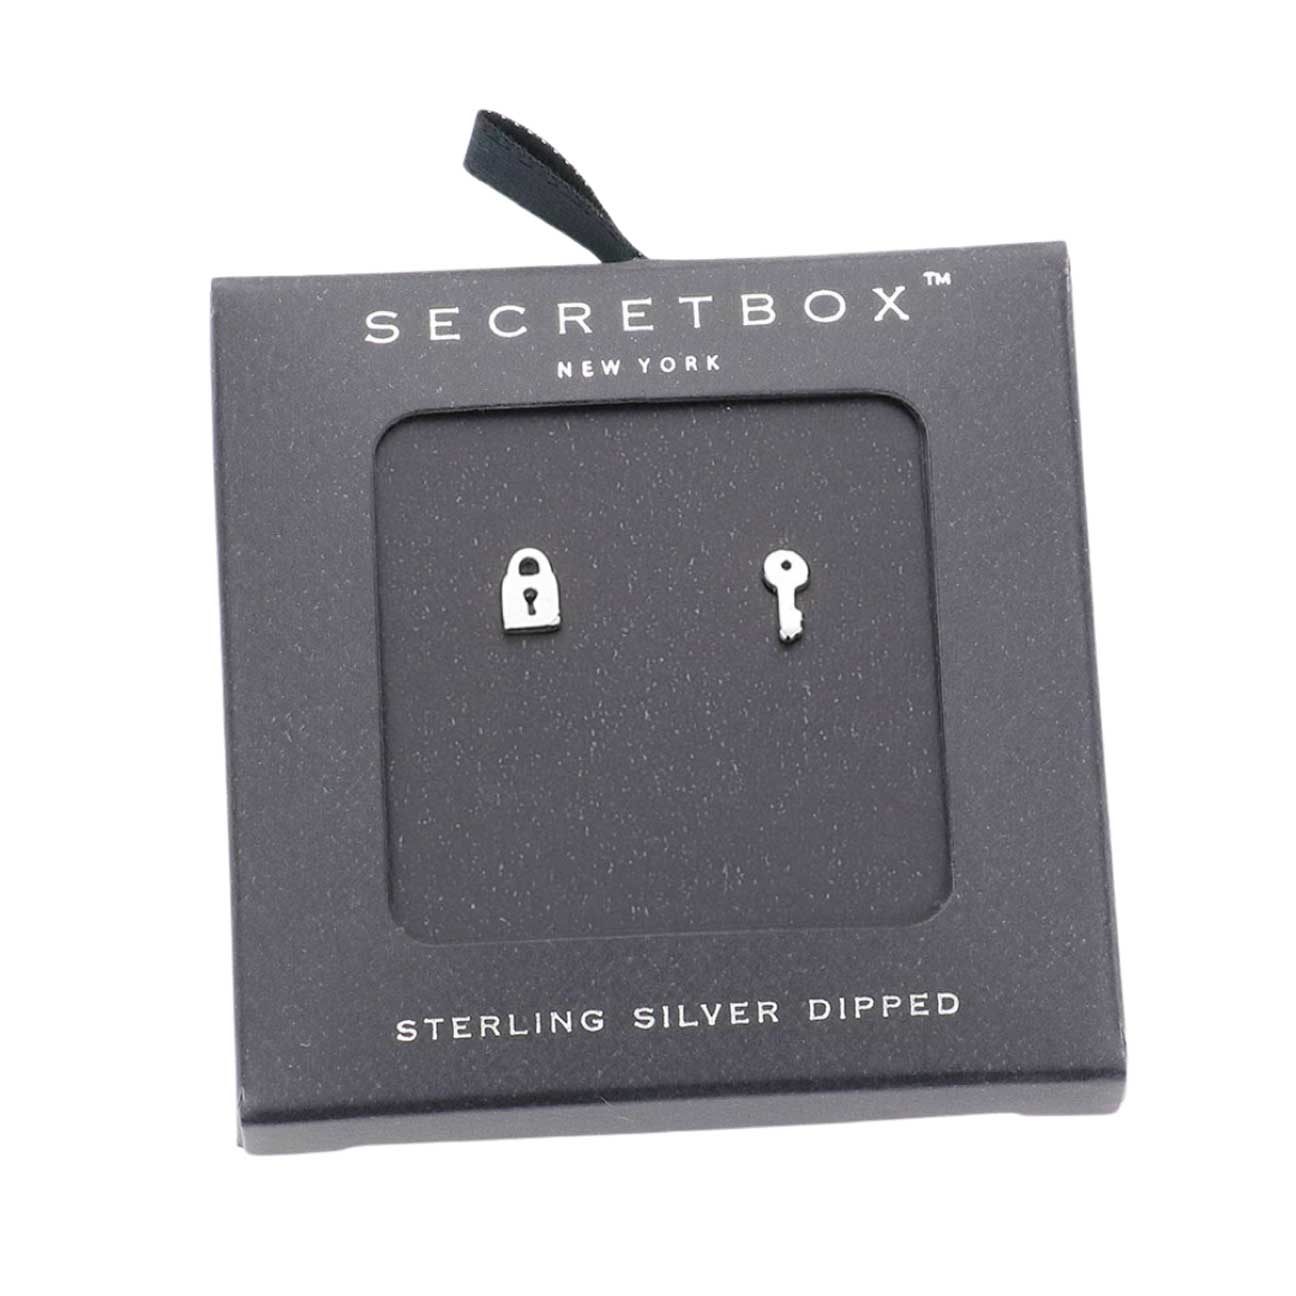 White Gold Secret Box Sterling Silver Dipped Key & Lock Stud Earrings. Its minimalistic design is perfect for everyday wear and adds a pop of color to any ensemble. The key and lock design add a unique subtle hint of sophistication and elegance. Perfect gift for Birthday, Anniversary , Mother's Day, Anniversary, Valentine's Day.